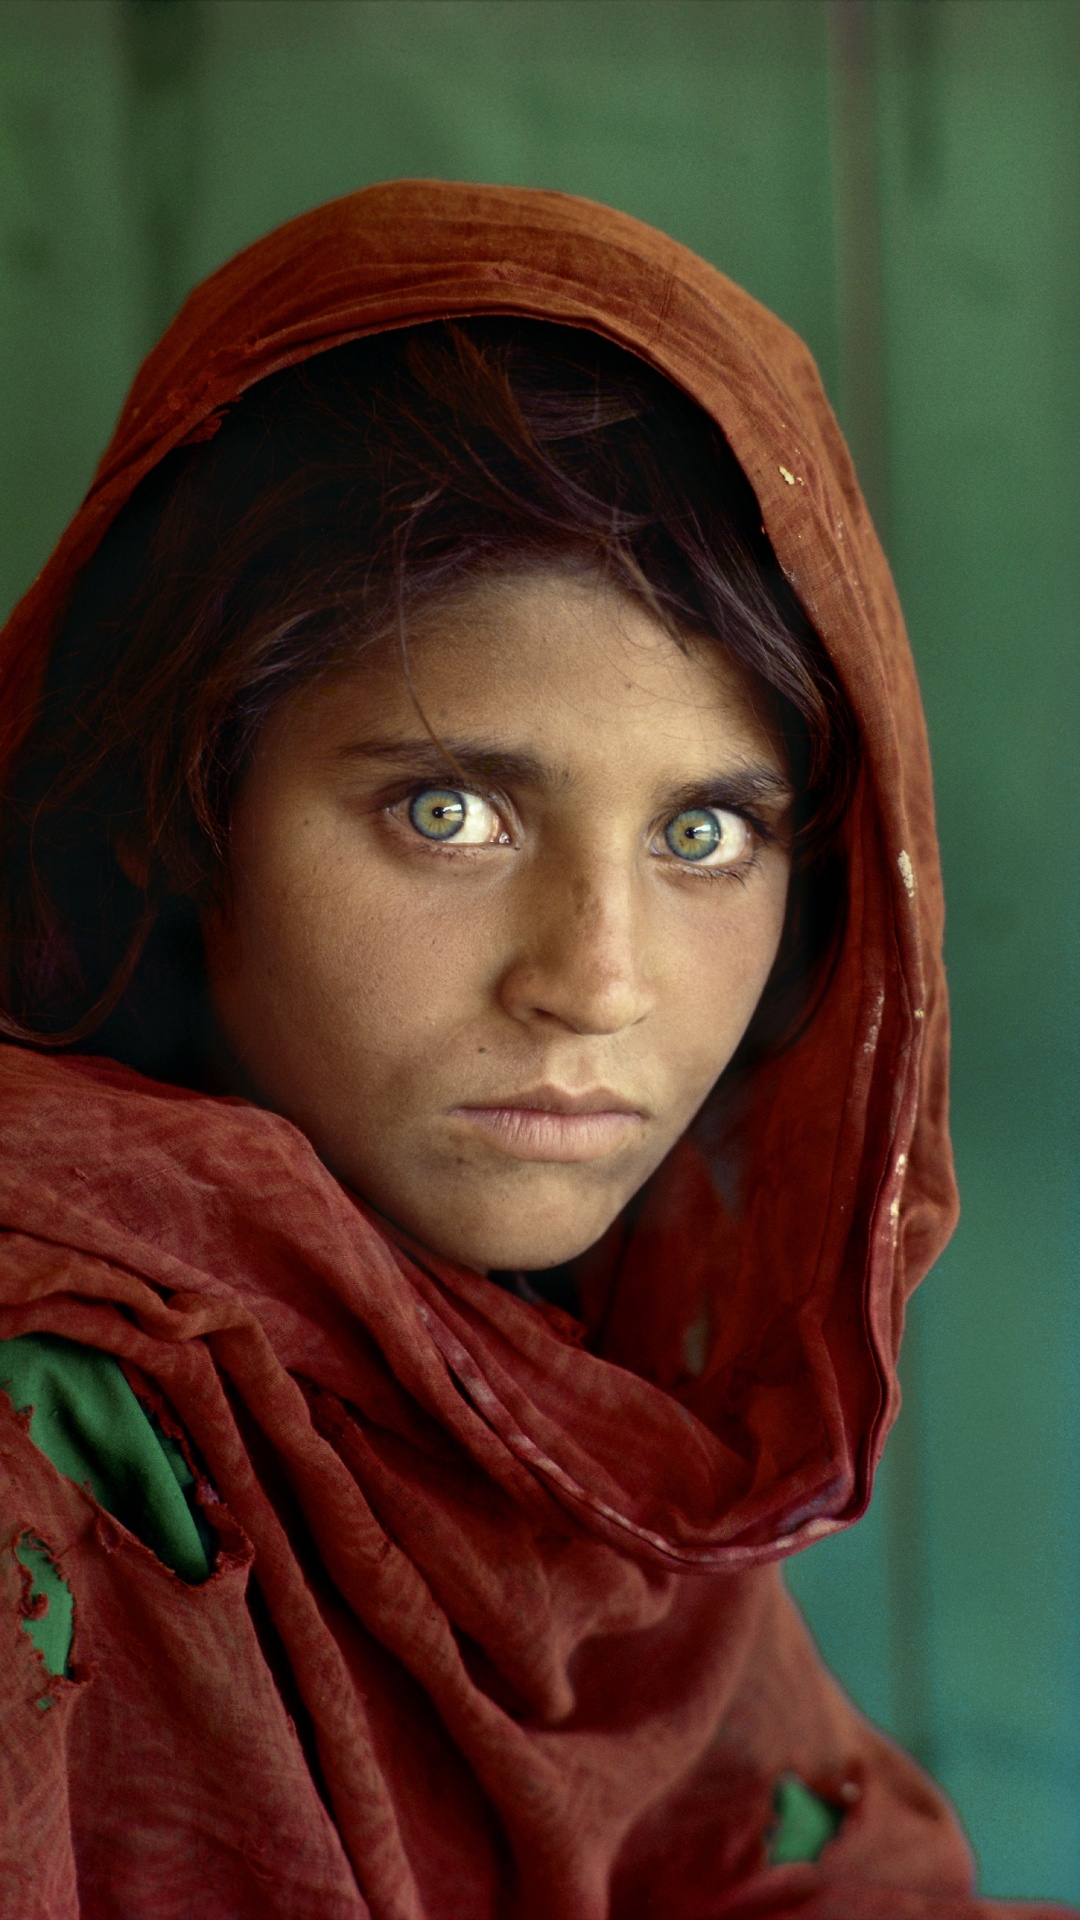 Afghan Girl, Afghanistan, National Geographic, Face, Eye. Wallpaper in 1080x1920 Resolution